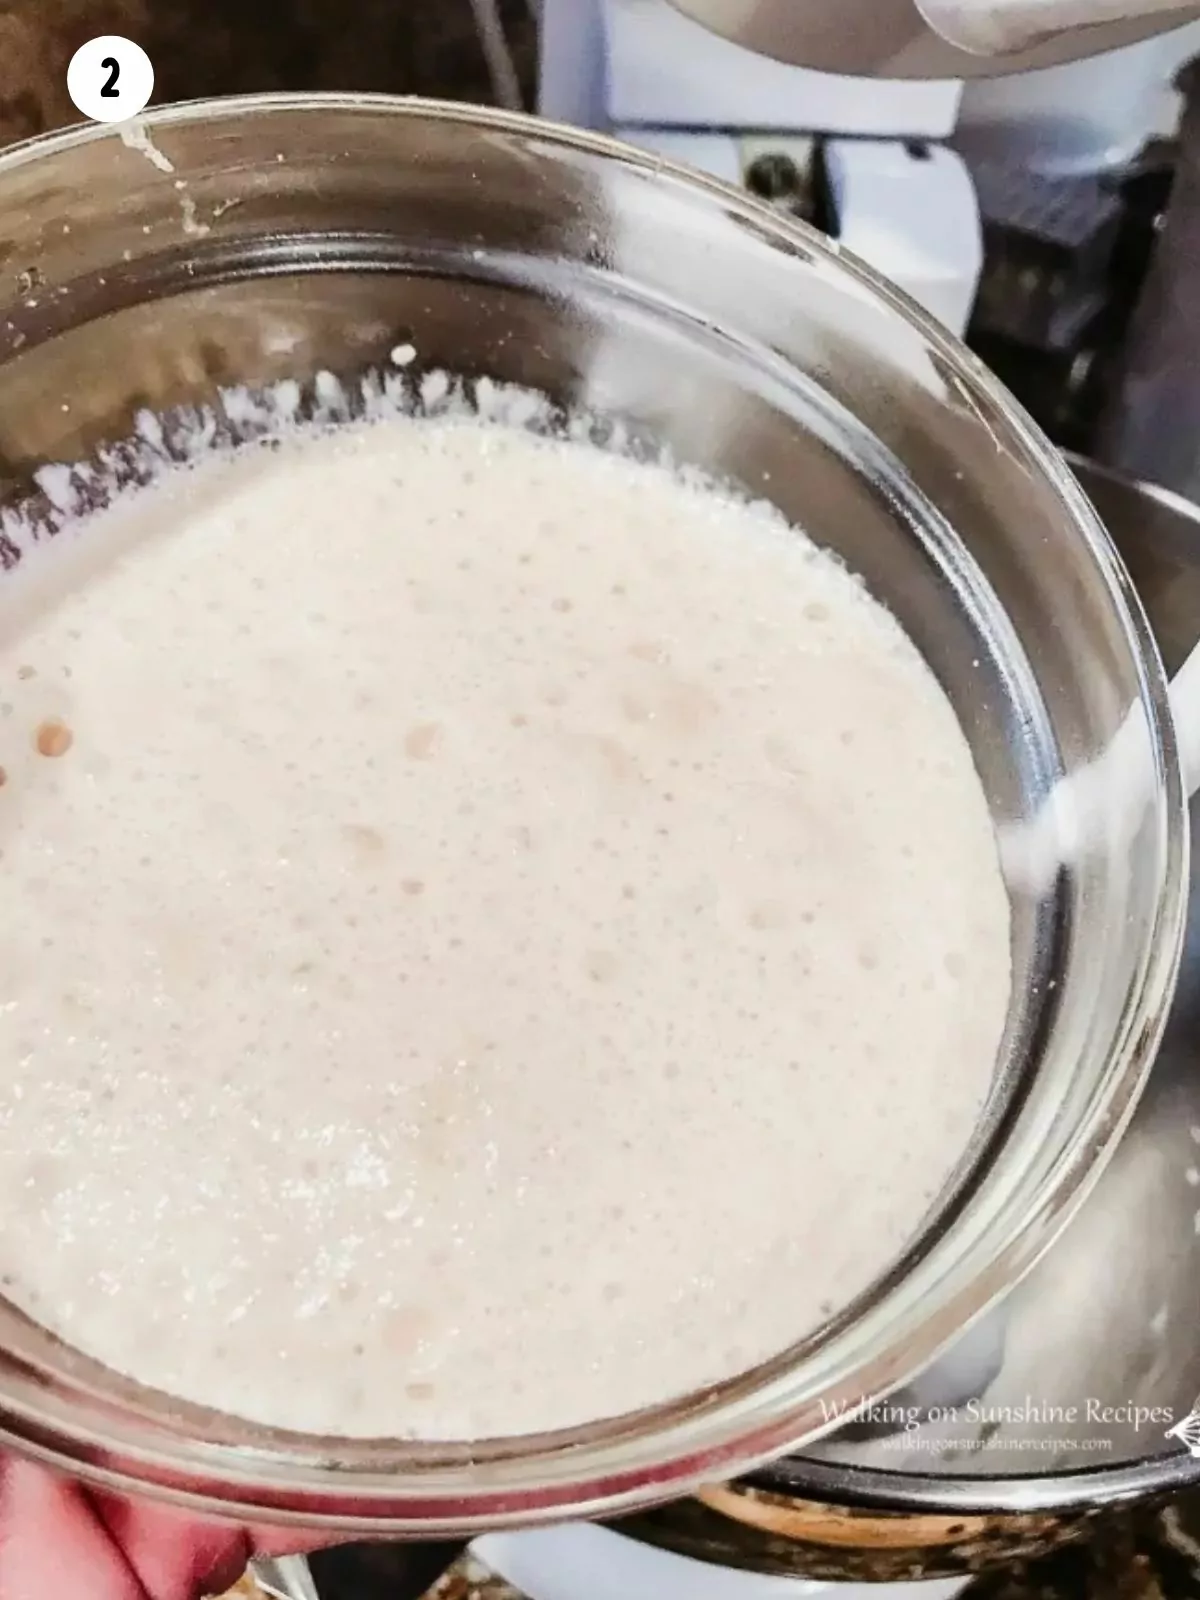 Yeast added to mixing bowl.